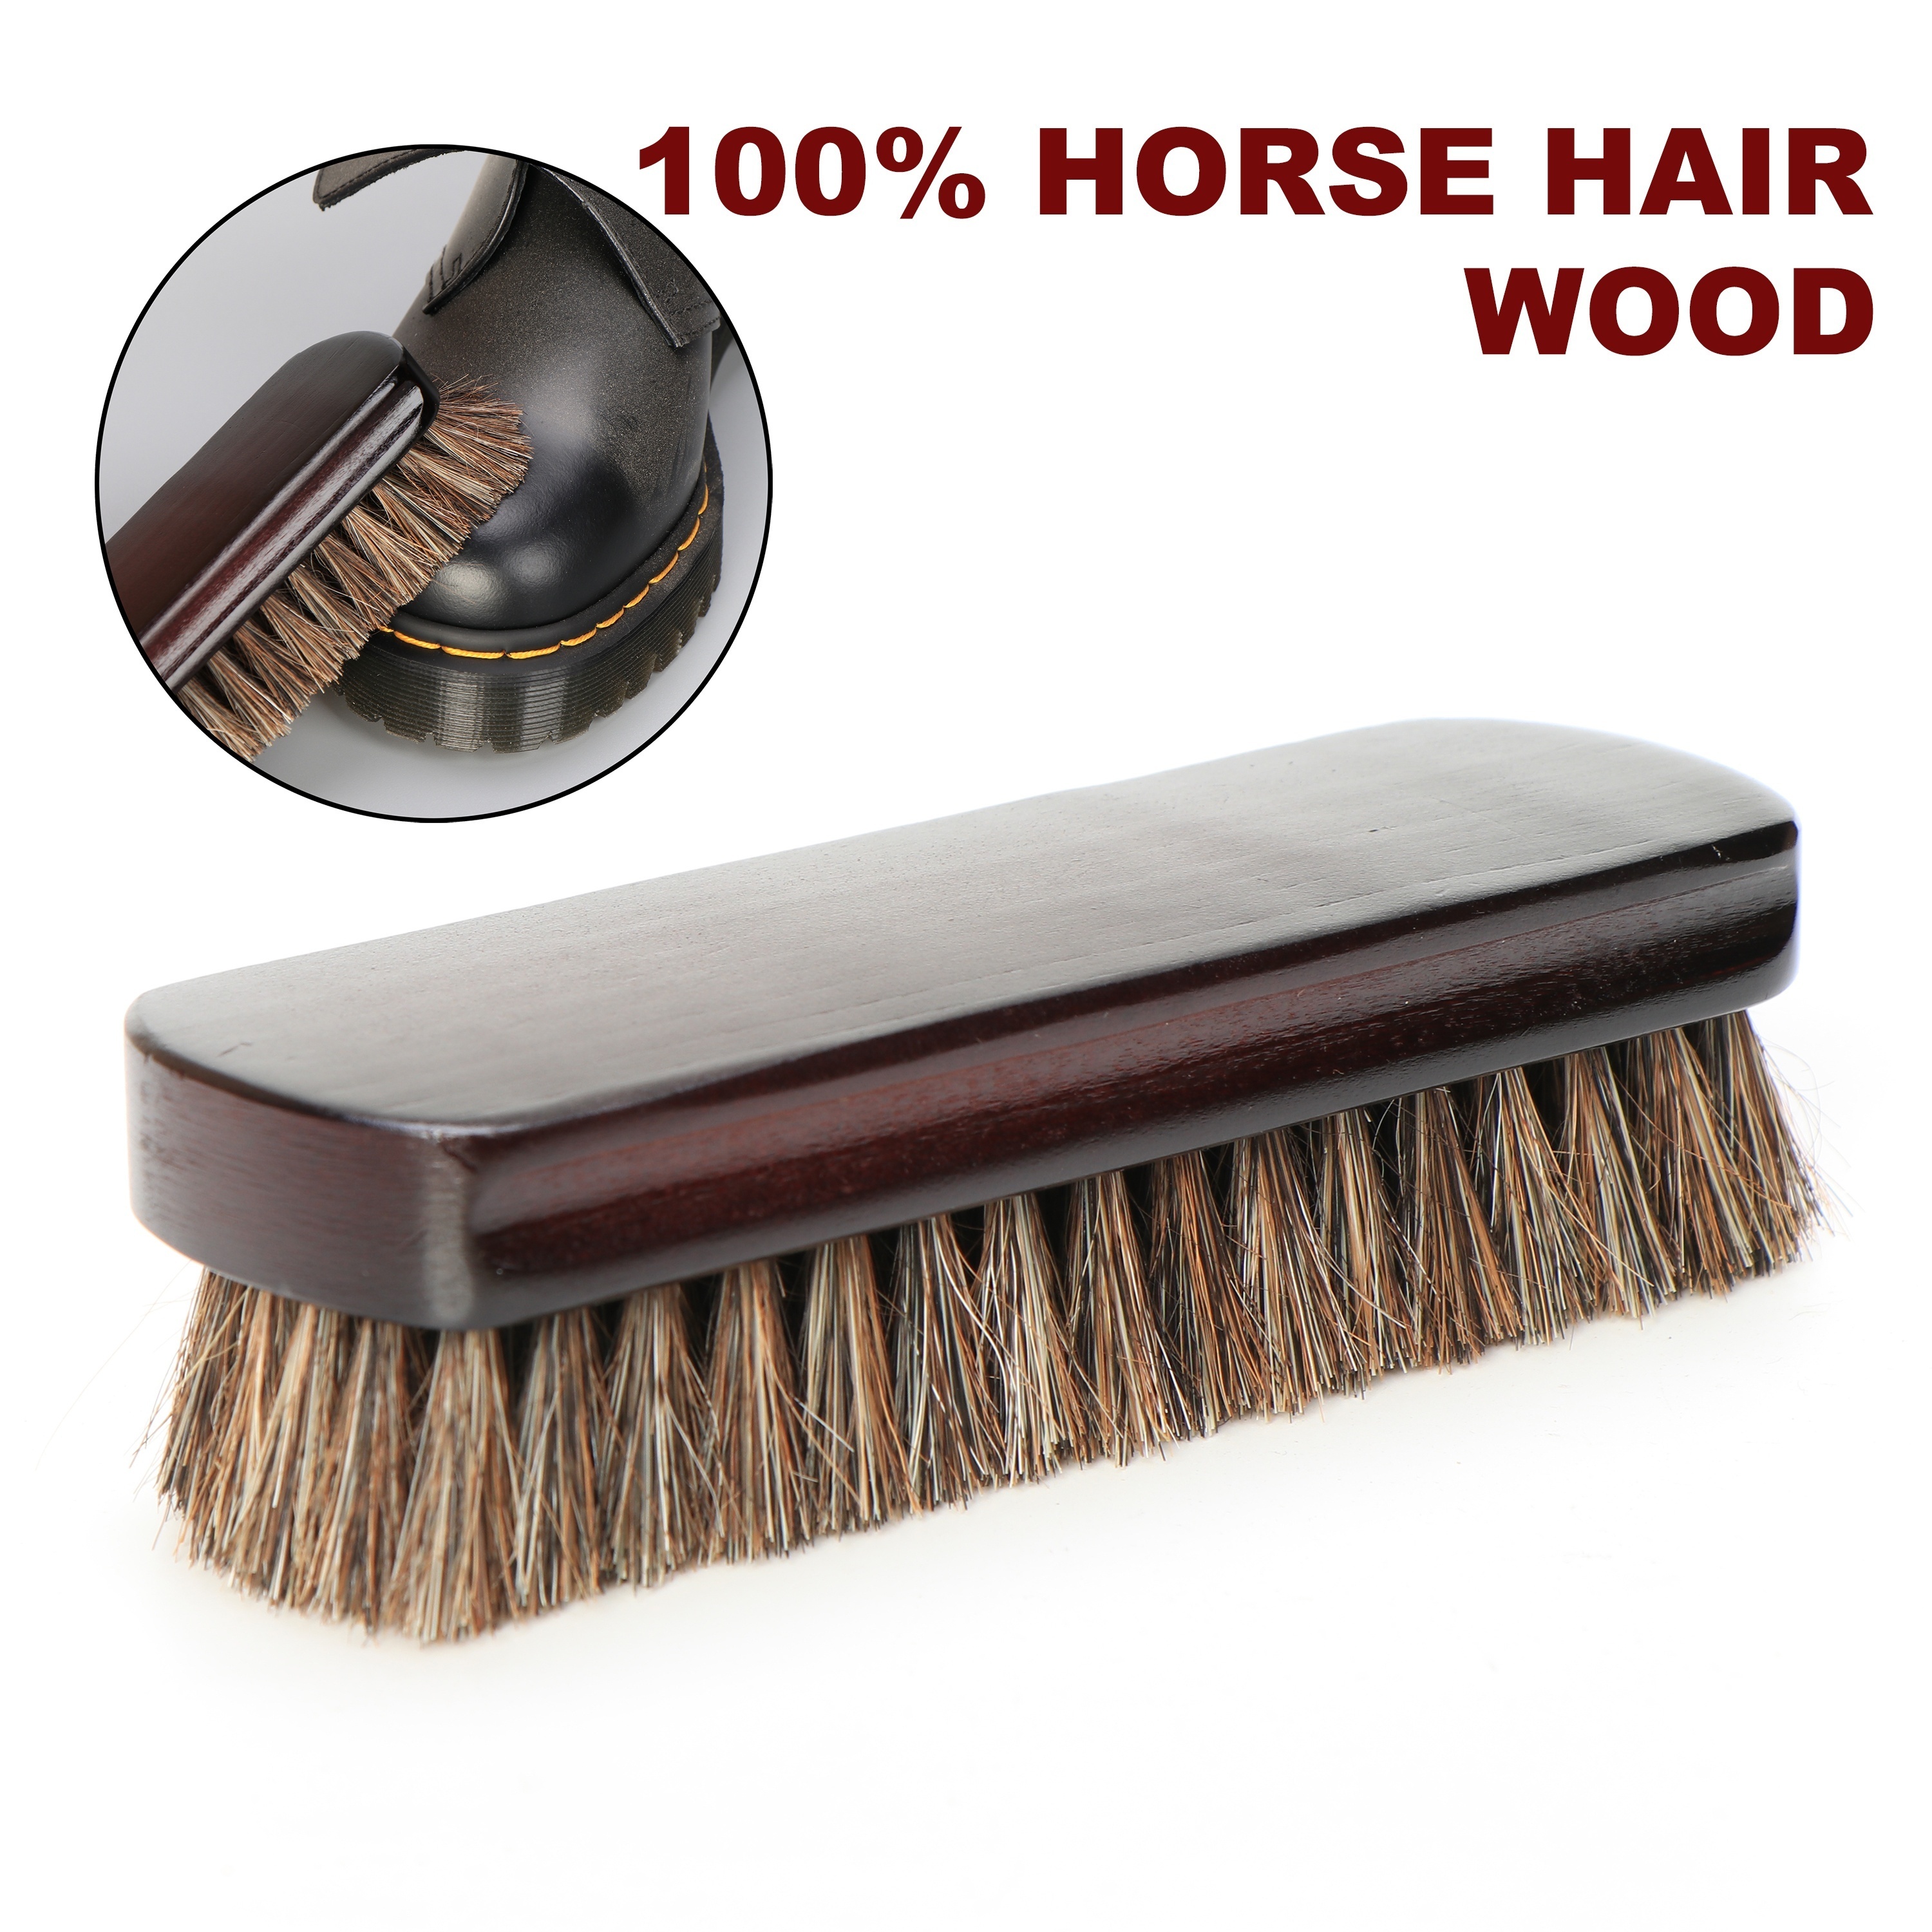 

1pc Horse Hair Shoe Brushes, Cleaning Polishing, Leather Care Protecting For Shoes Boots, Oil Polishing Cleaning Dust Brush